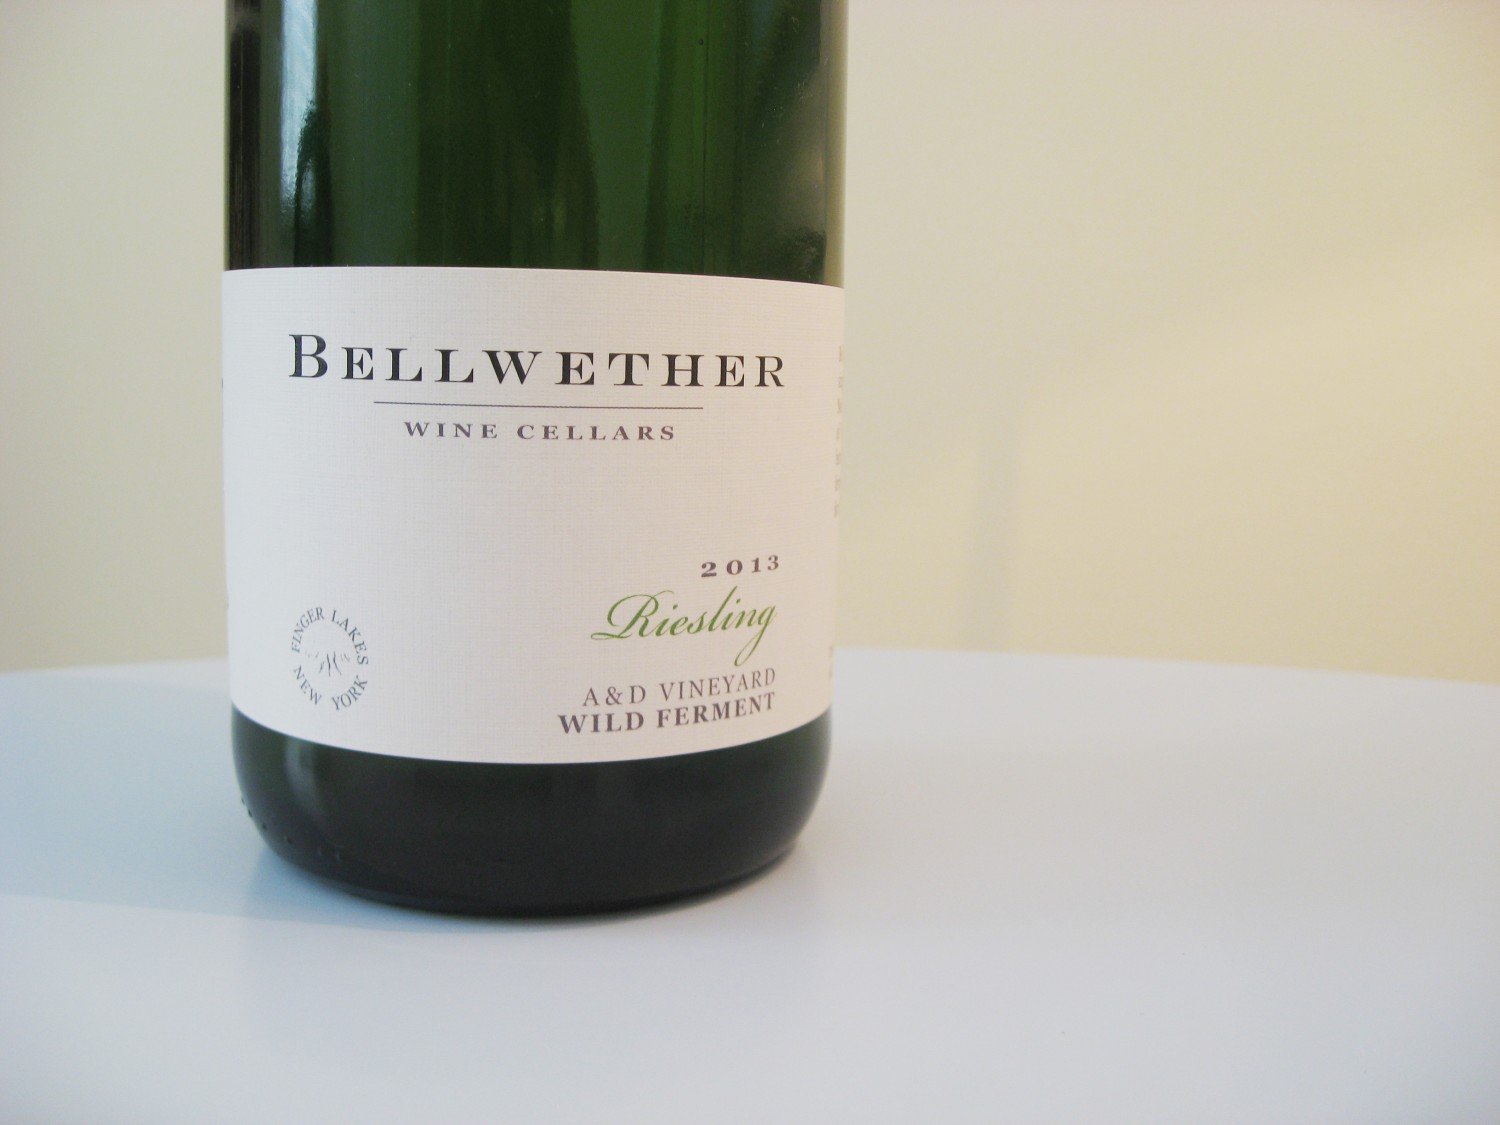 Bellwether Wine Cellars, A&D Vineyard Wild Ferment Riesling 2013, Finger Lakes, New York, Wine Casual